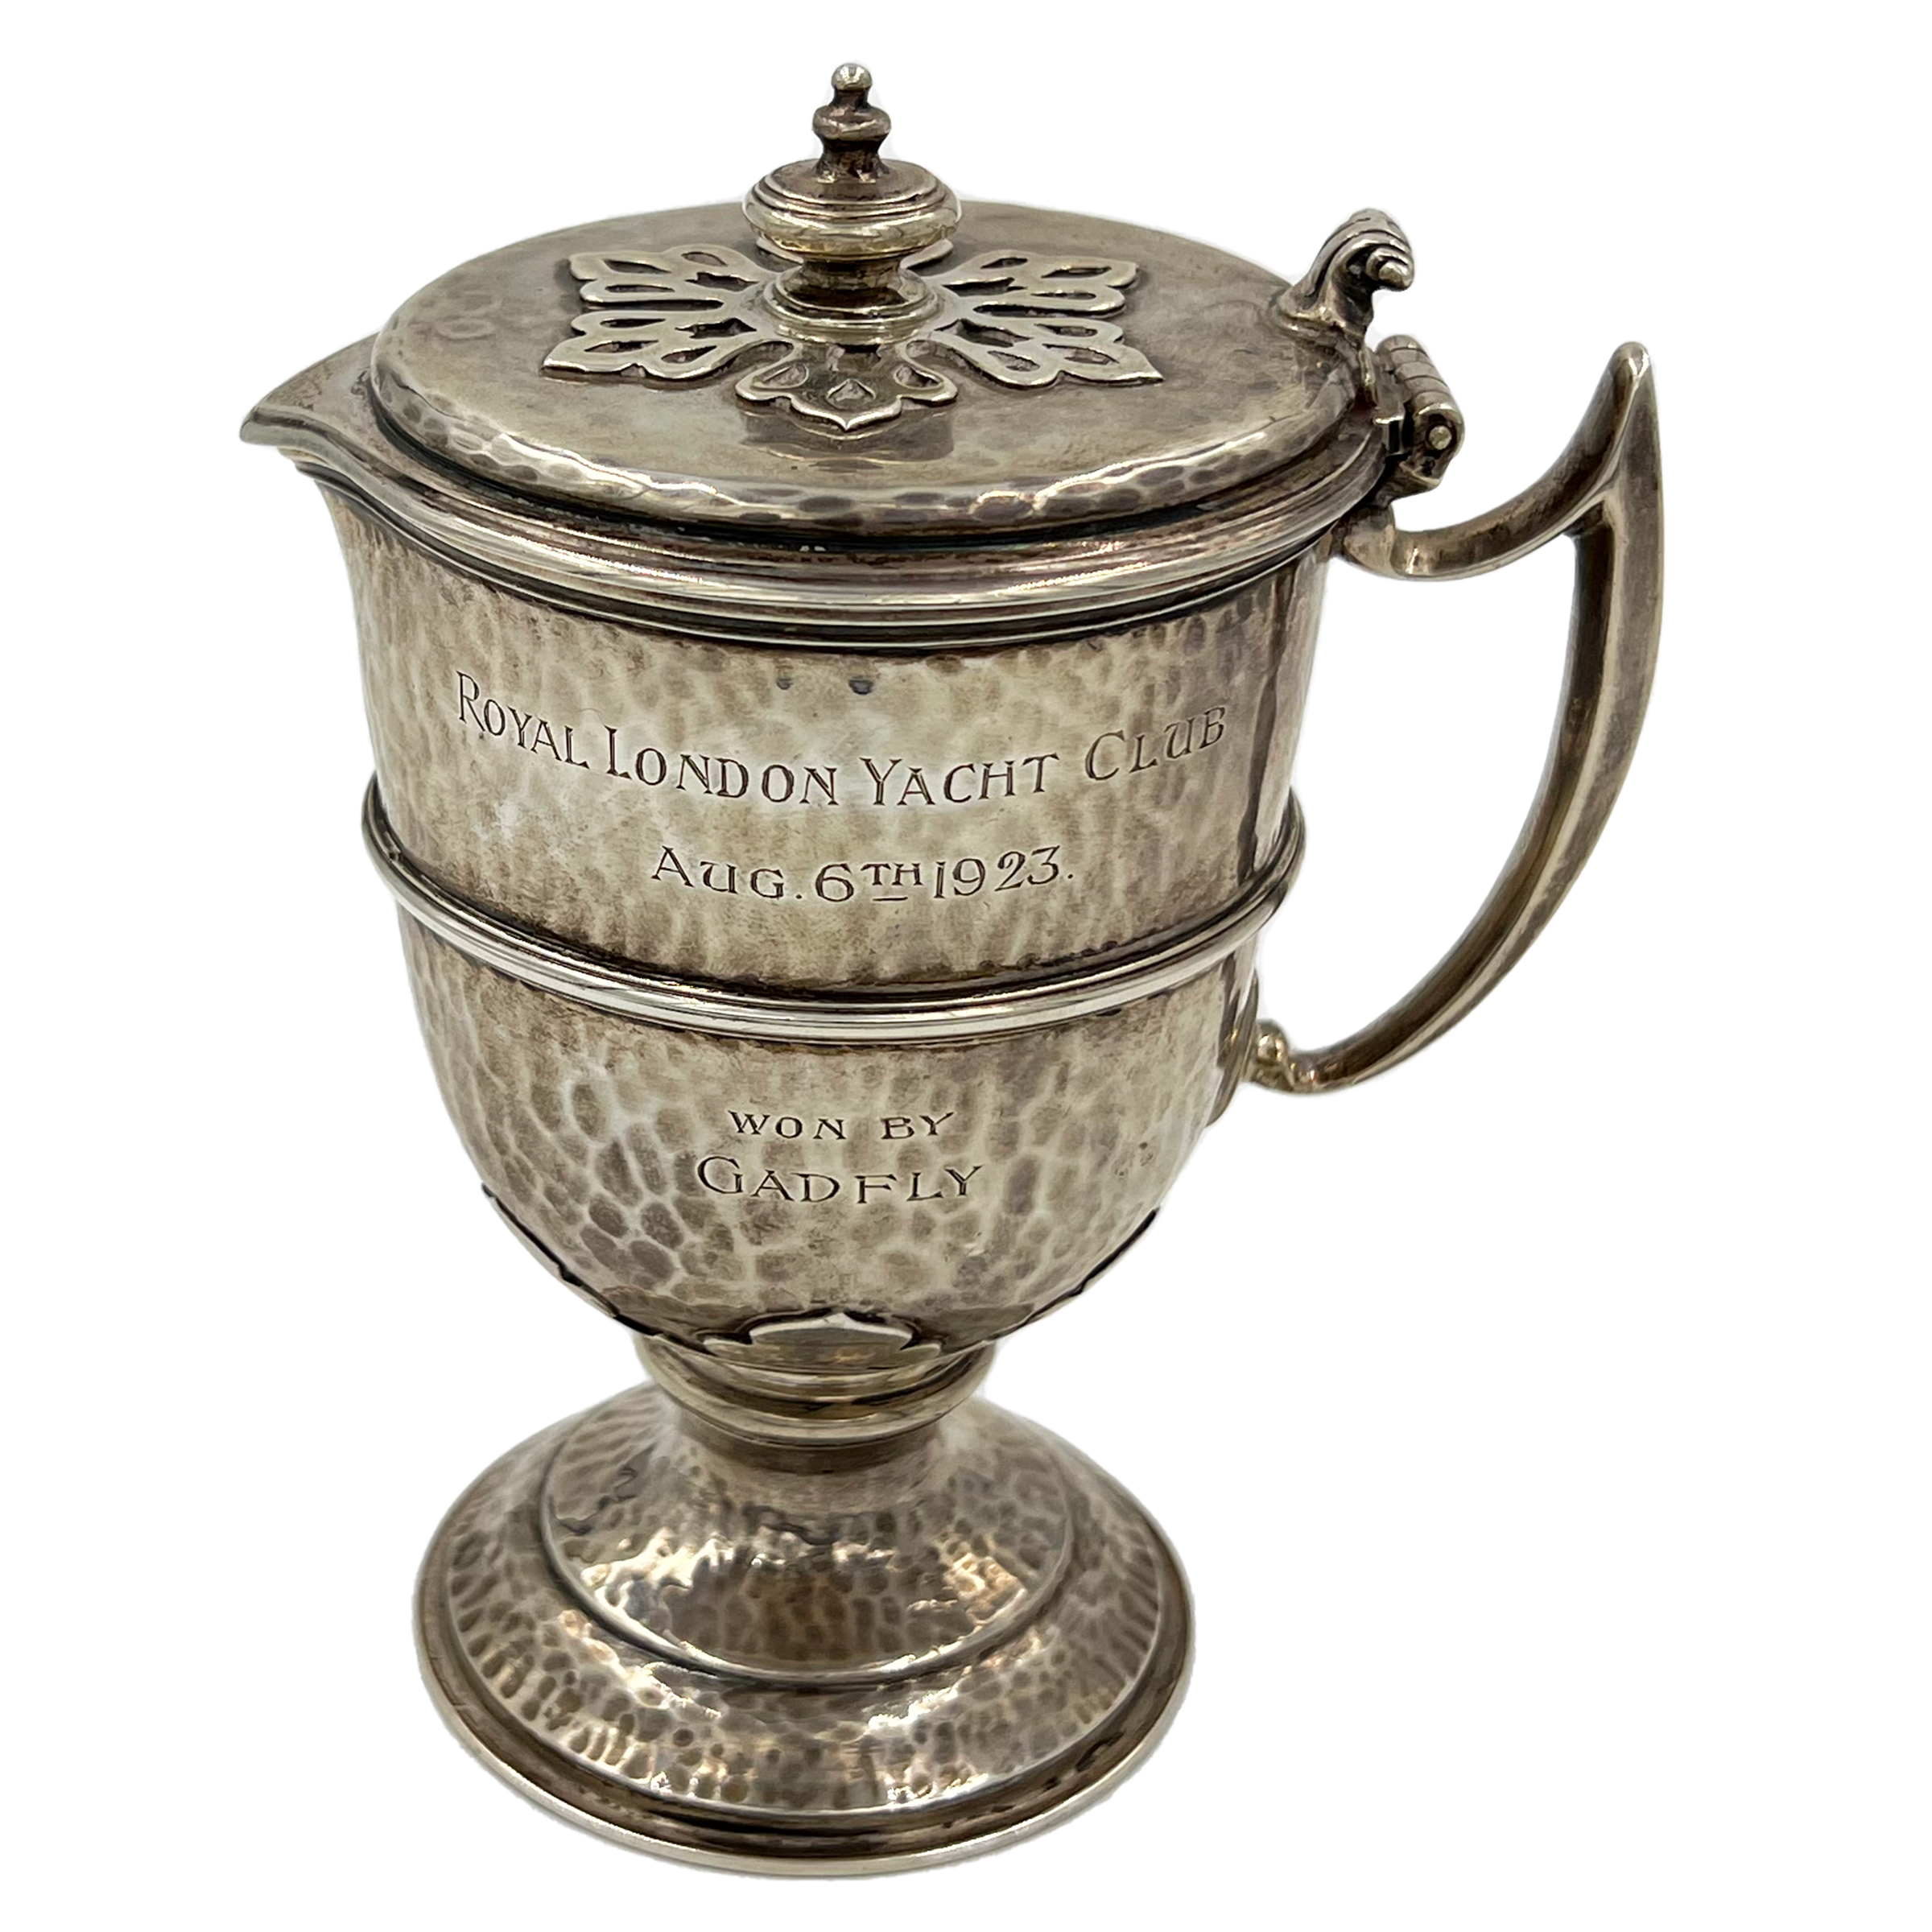 A SMALL VICTORIAN HAMMERED SILVER LIDDED FLAGON WITH A YACHTING INTEREST ENGRAVING